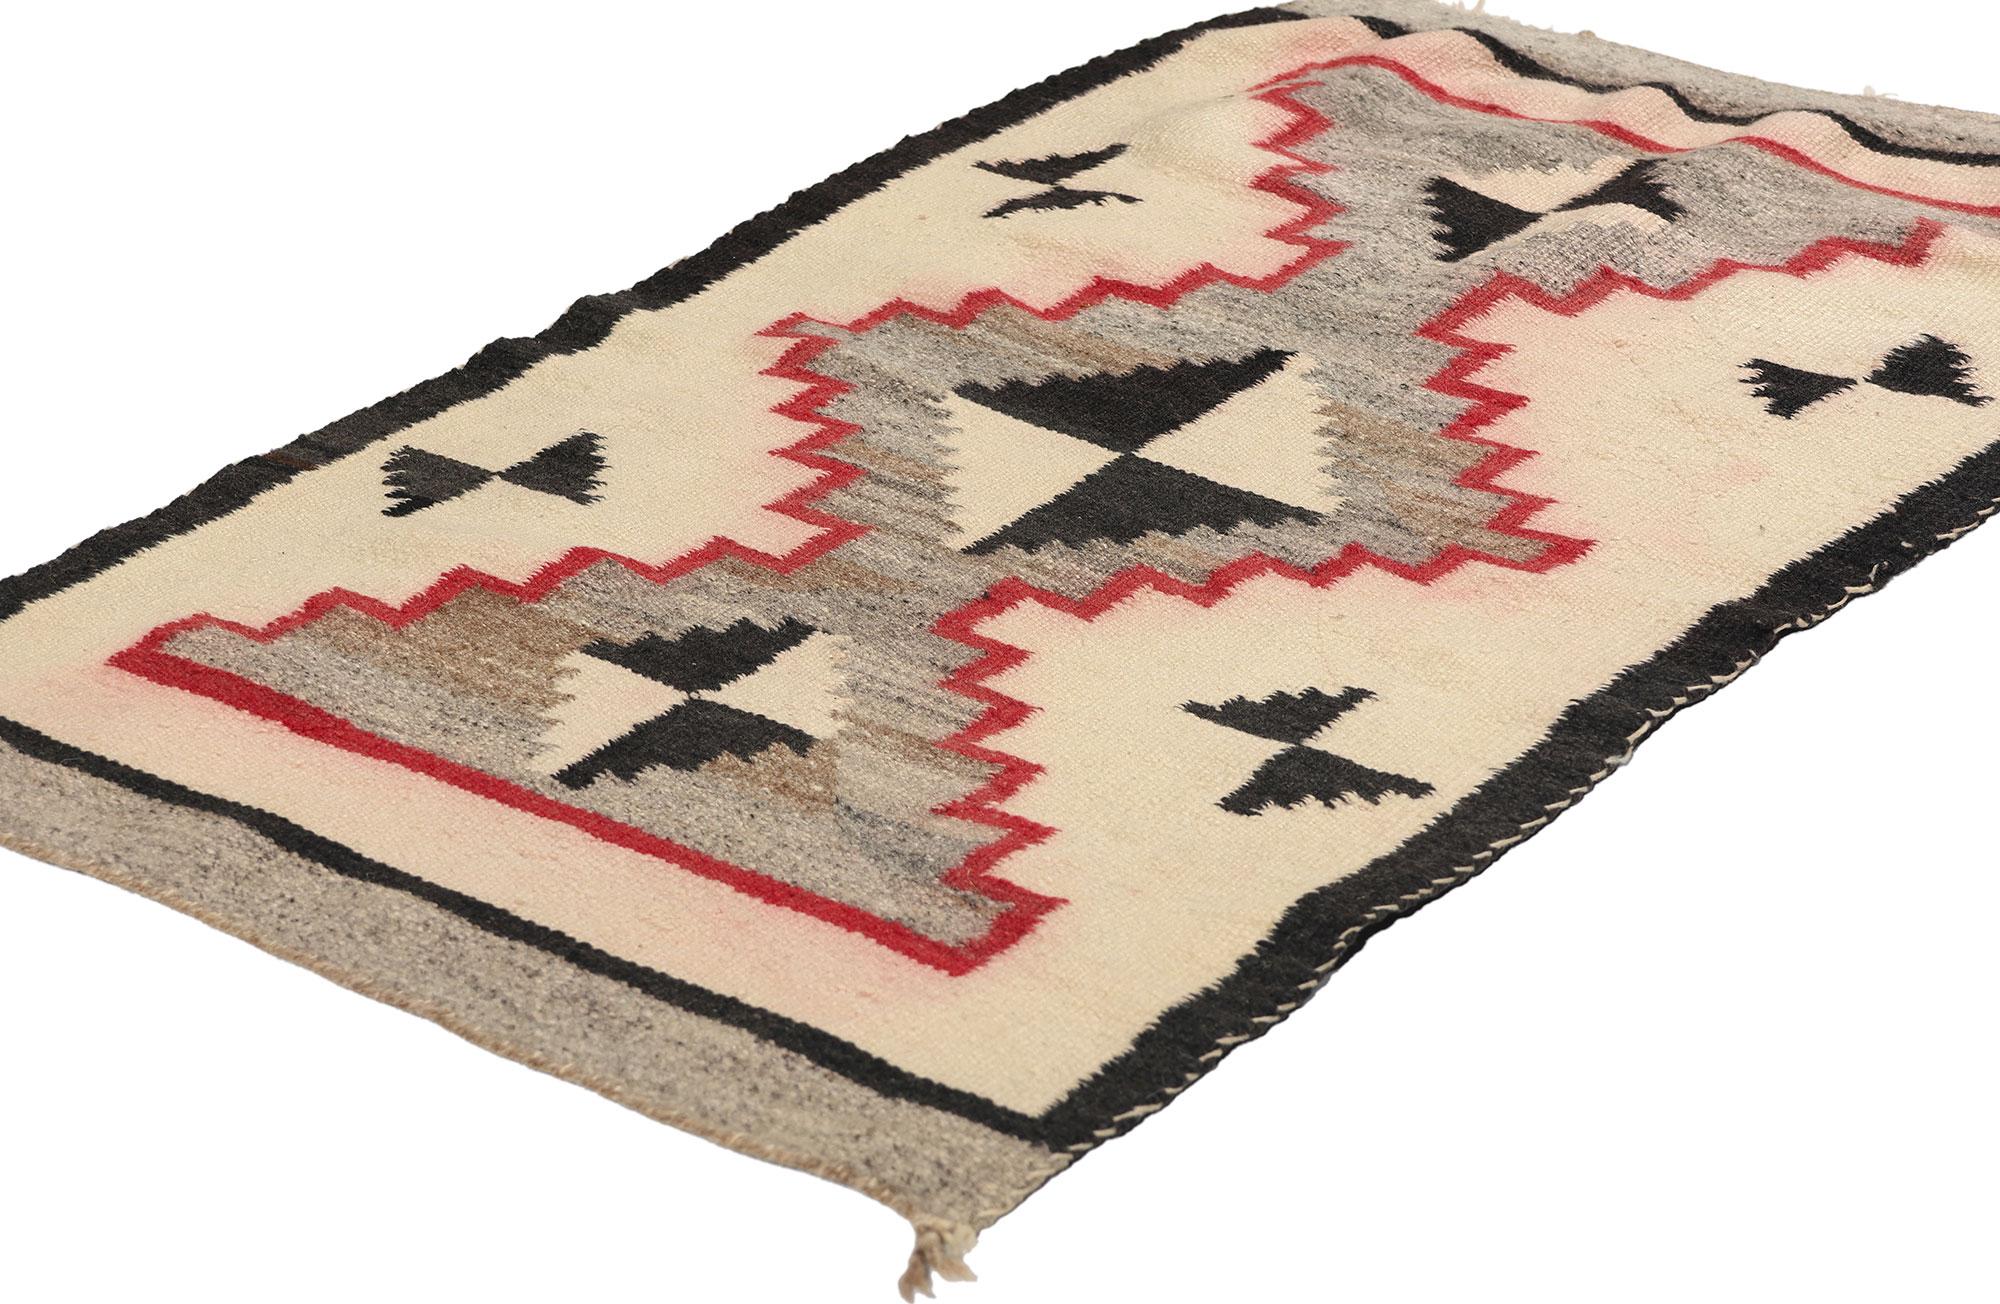 78752 Antique Transitional Navajo Rug, 02'01 x 03'05. Transitional Navajo rugs, woven during the late 19th and early 20th centuries, mark a period of cultural change for the Navajo people influenced by increased contact with Euro-American settlers